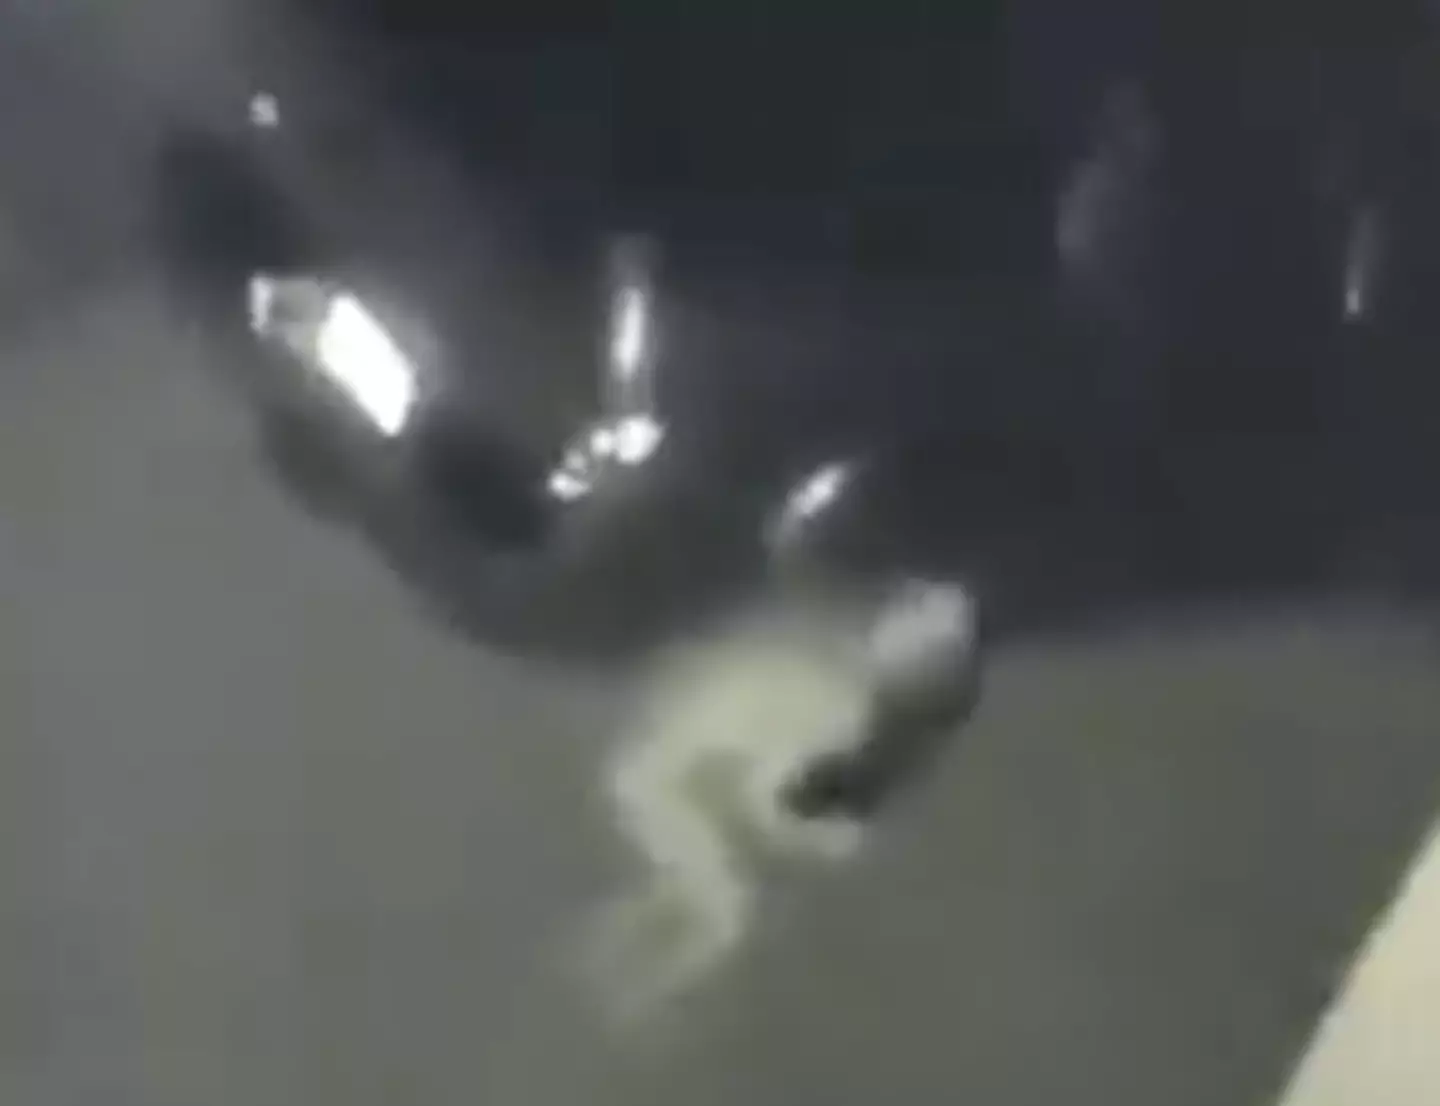 The 'Pale creature' was caught on camera near Moorhead, KY.